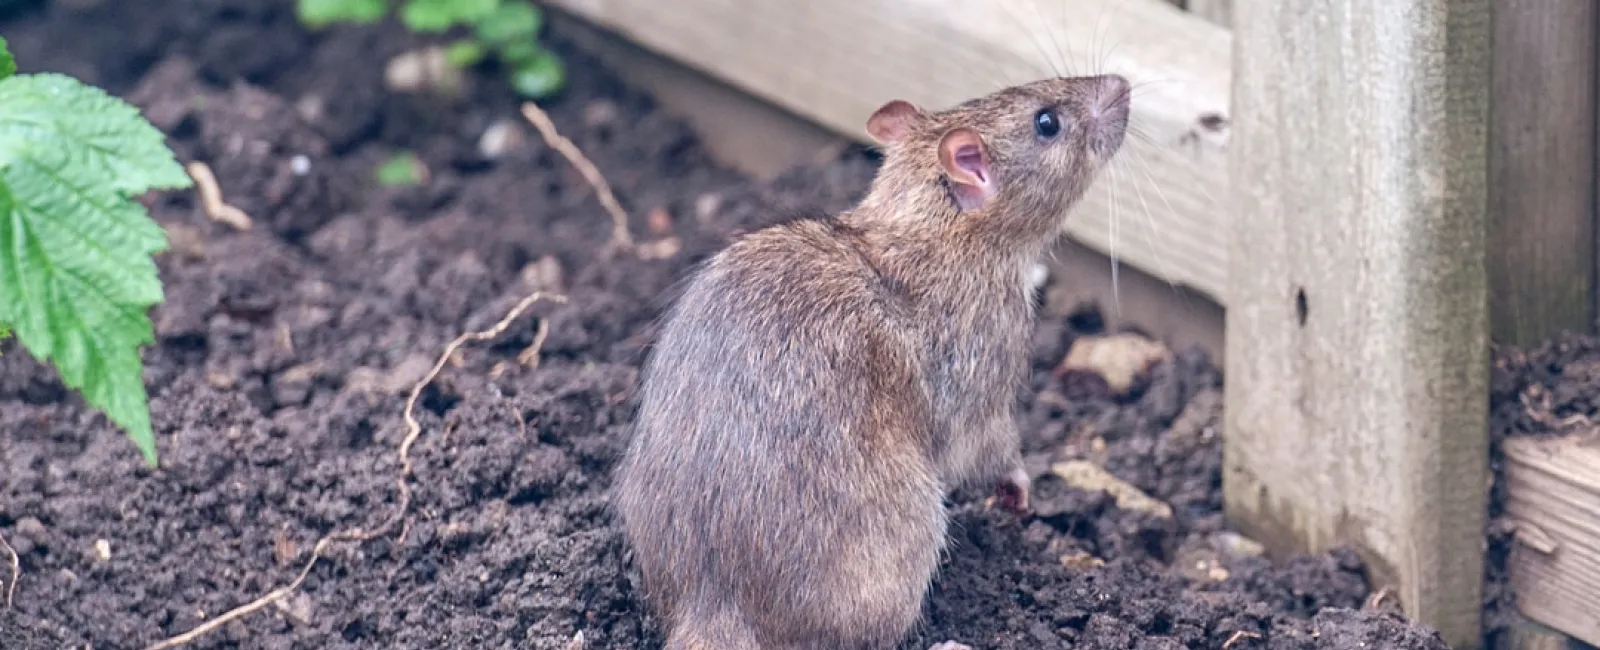 a rodent standing on dirt